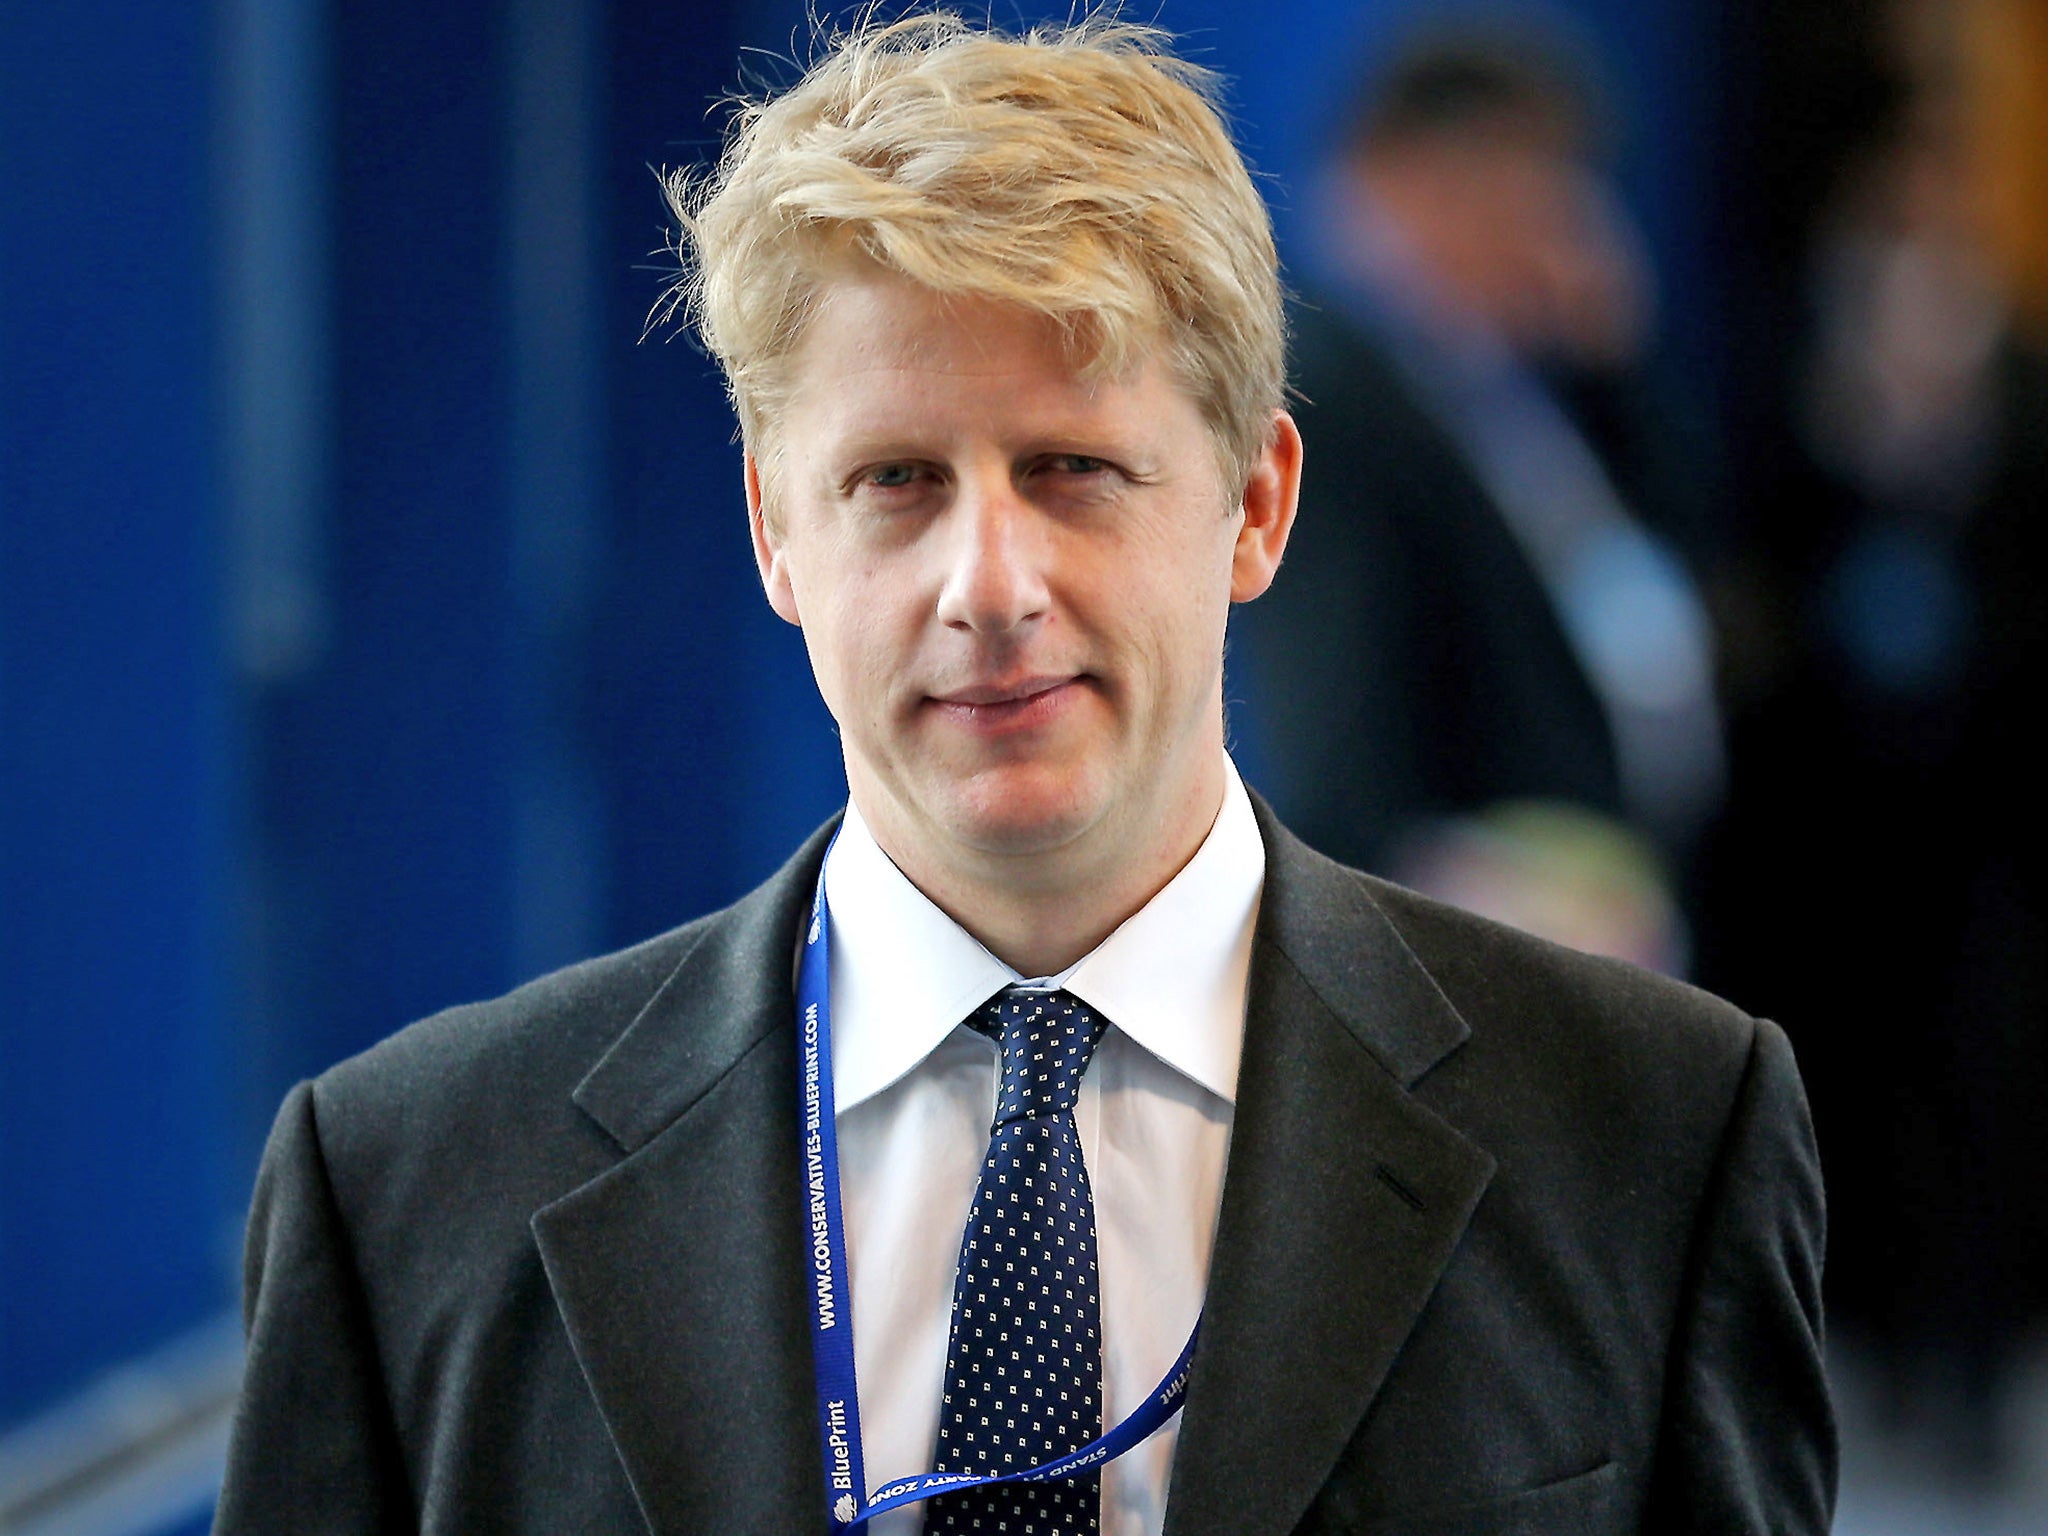 Jo Johnson said some universities had removed controversial book from their libraries - a claim vice chancellors said was untrue